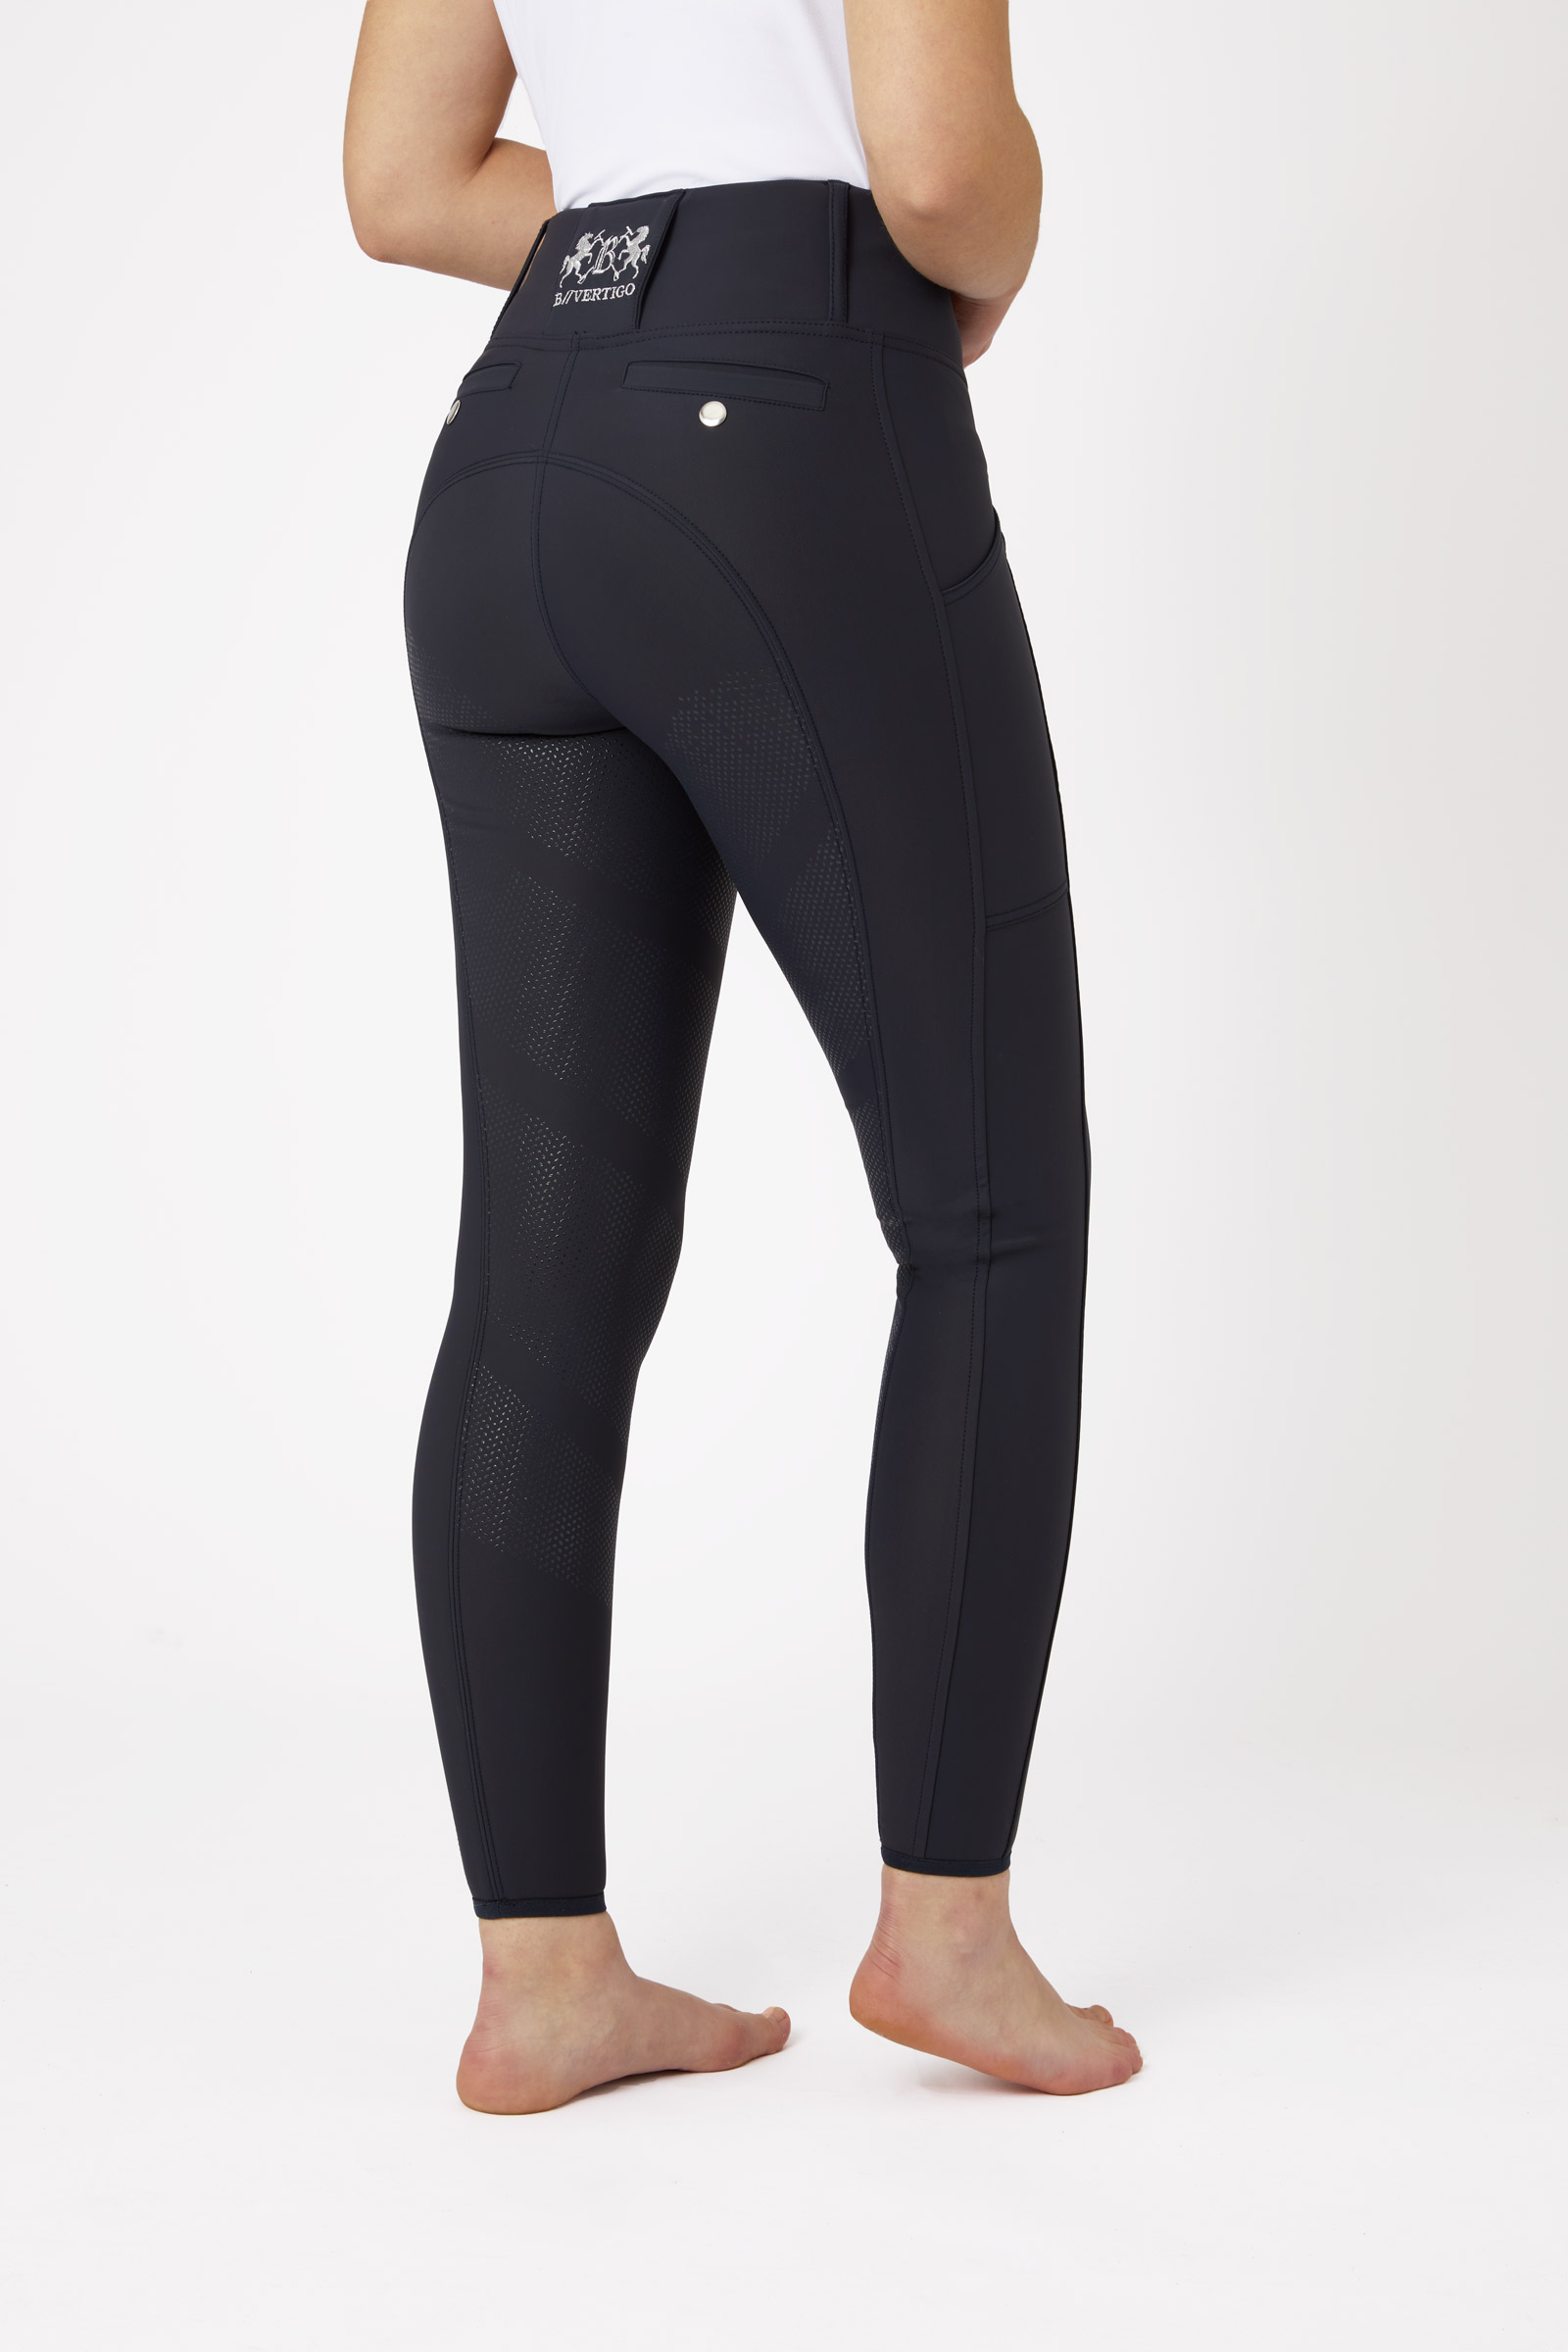 Buy Thermal Riding Tights Online - DUBLIN